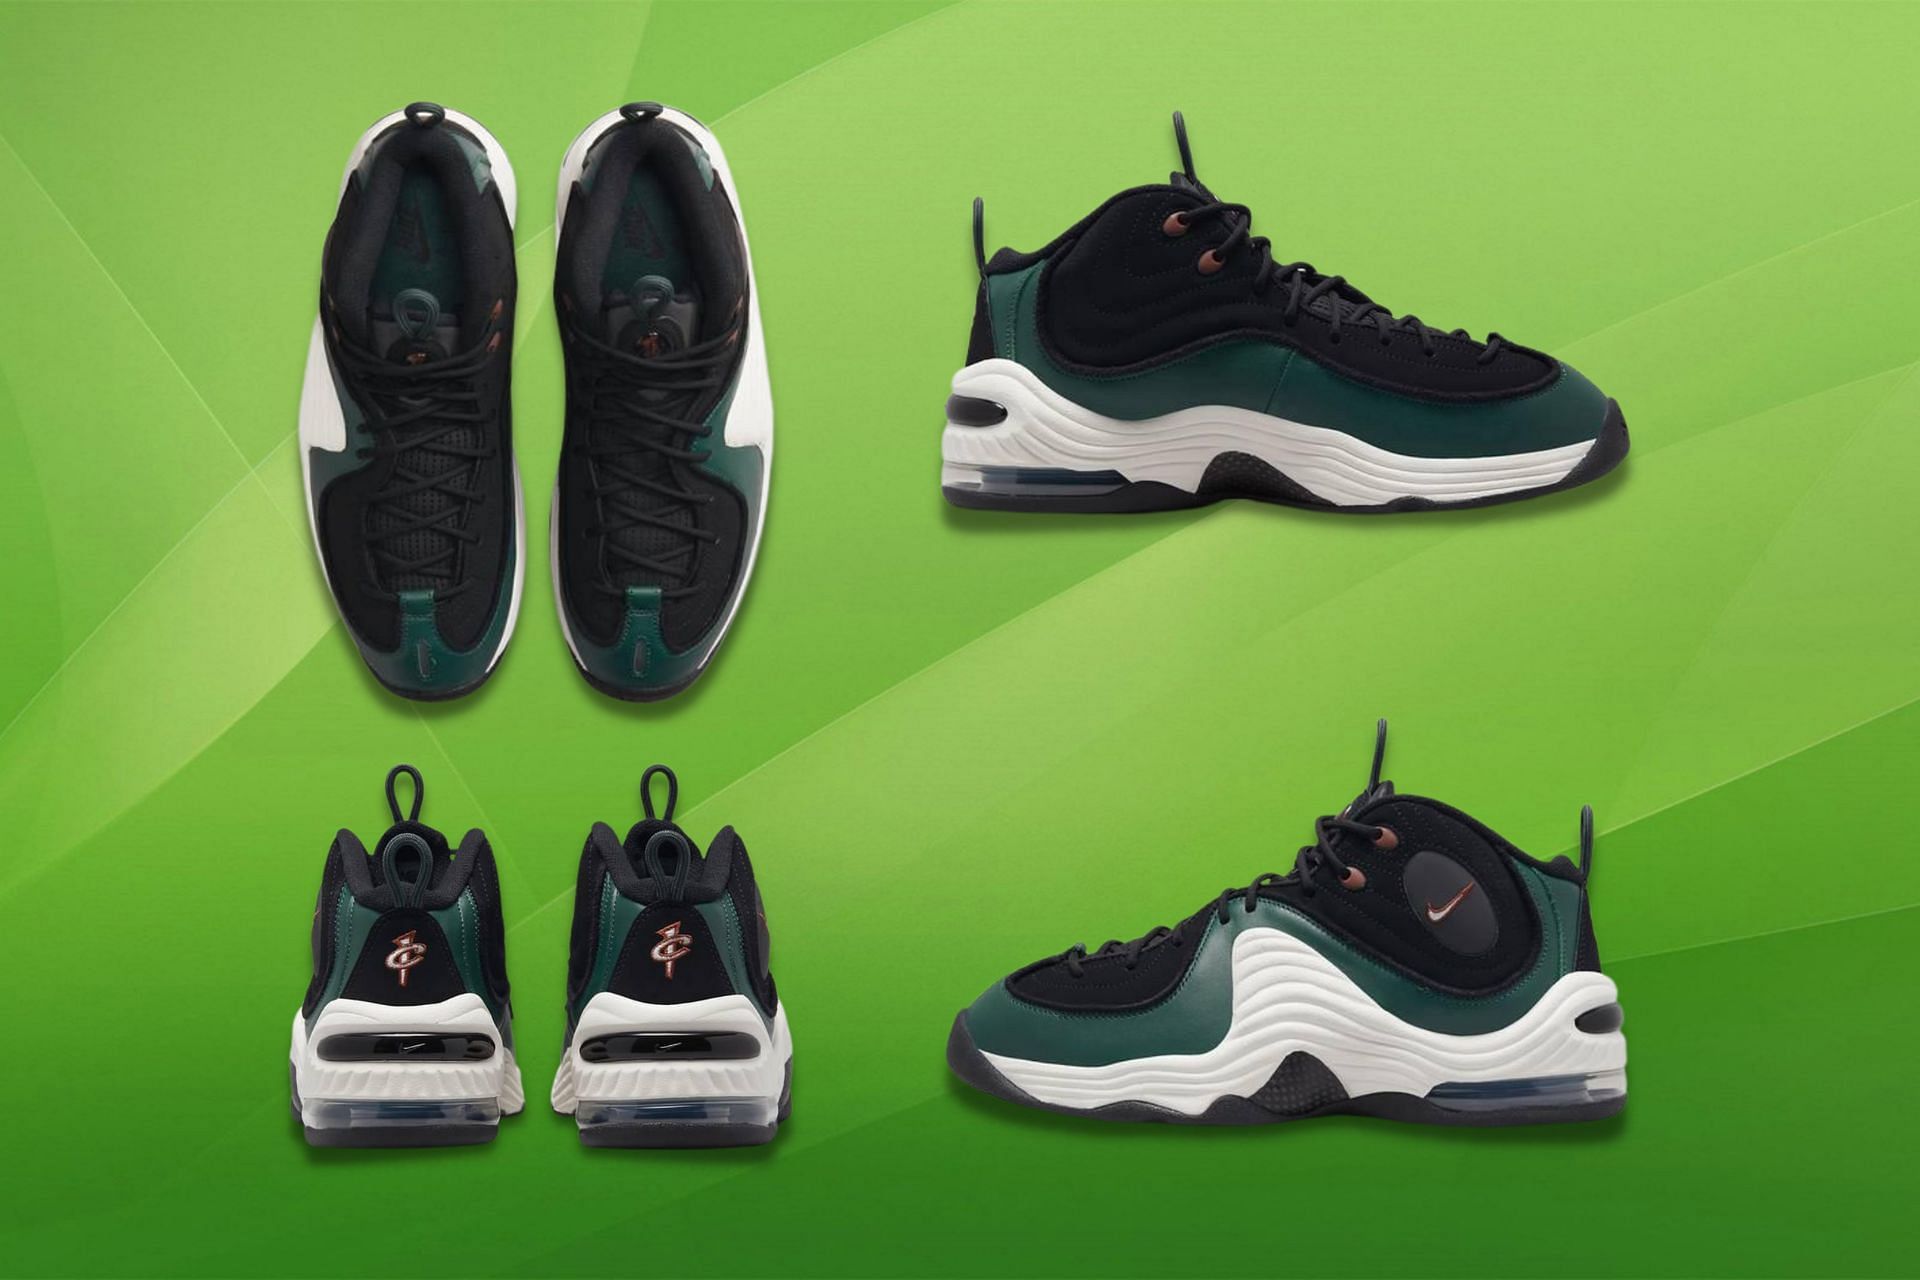 Take a closer look at the impending Nike Air Penny 2 Forest Green shoes (image via Sportskeeda)